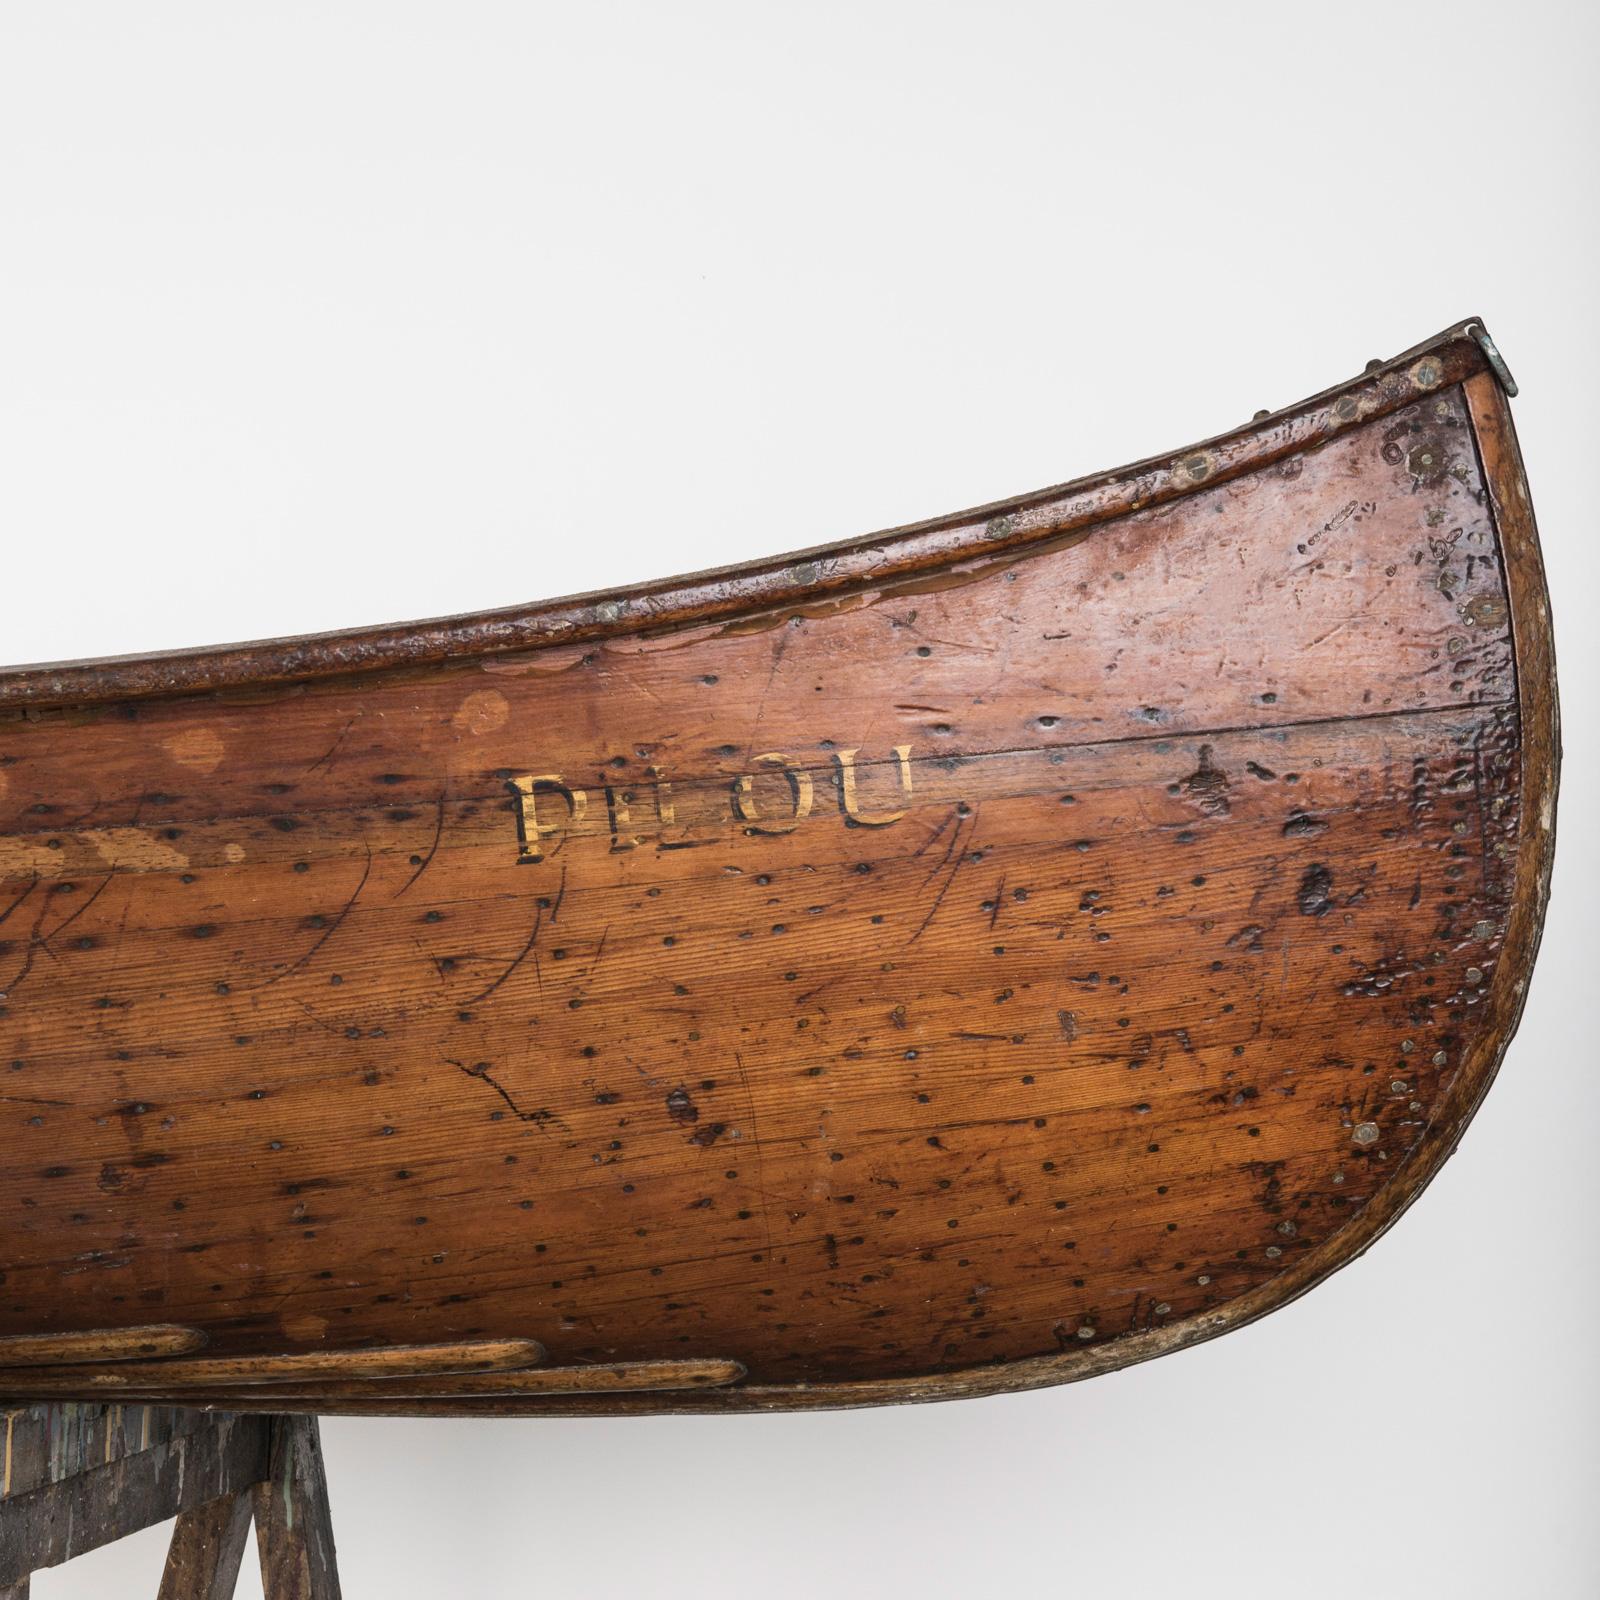 Vintage French wooden (sailing) canoe by Seyler, l’Hirondelle. The name of this boat is Pilou.

Finely made French vintage wooden canoe by Seyler, France. Bearing the decal of the maker. All hand fabricated complete with kayak paddles, and seats.